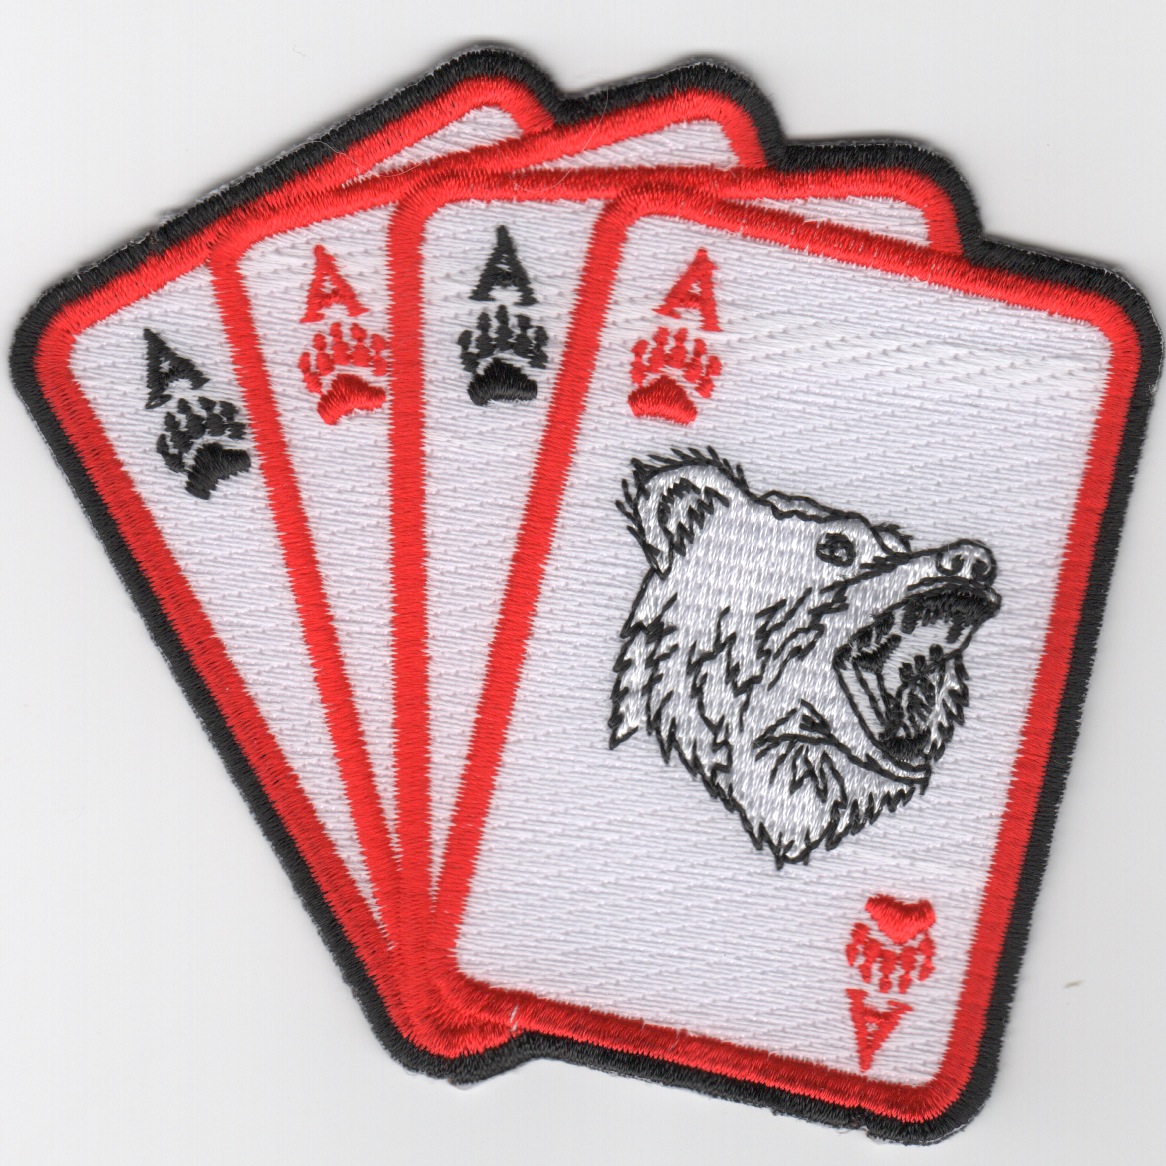 VAW-124 '4-Aces' Bear Patch